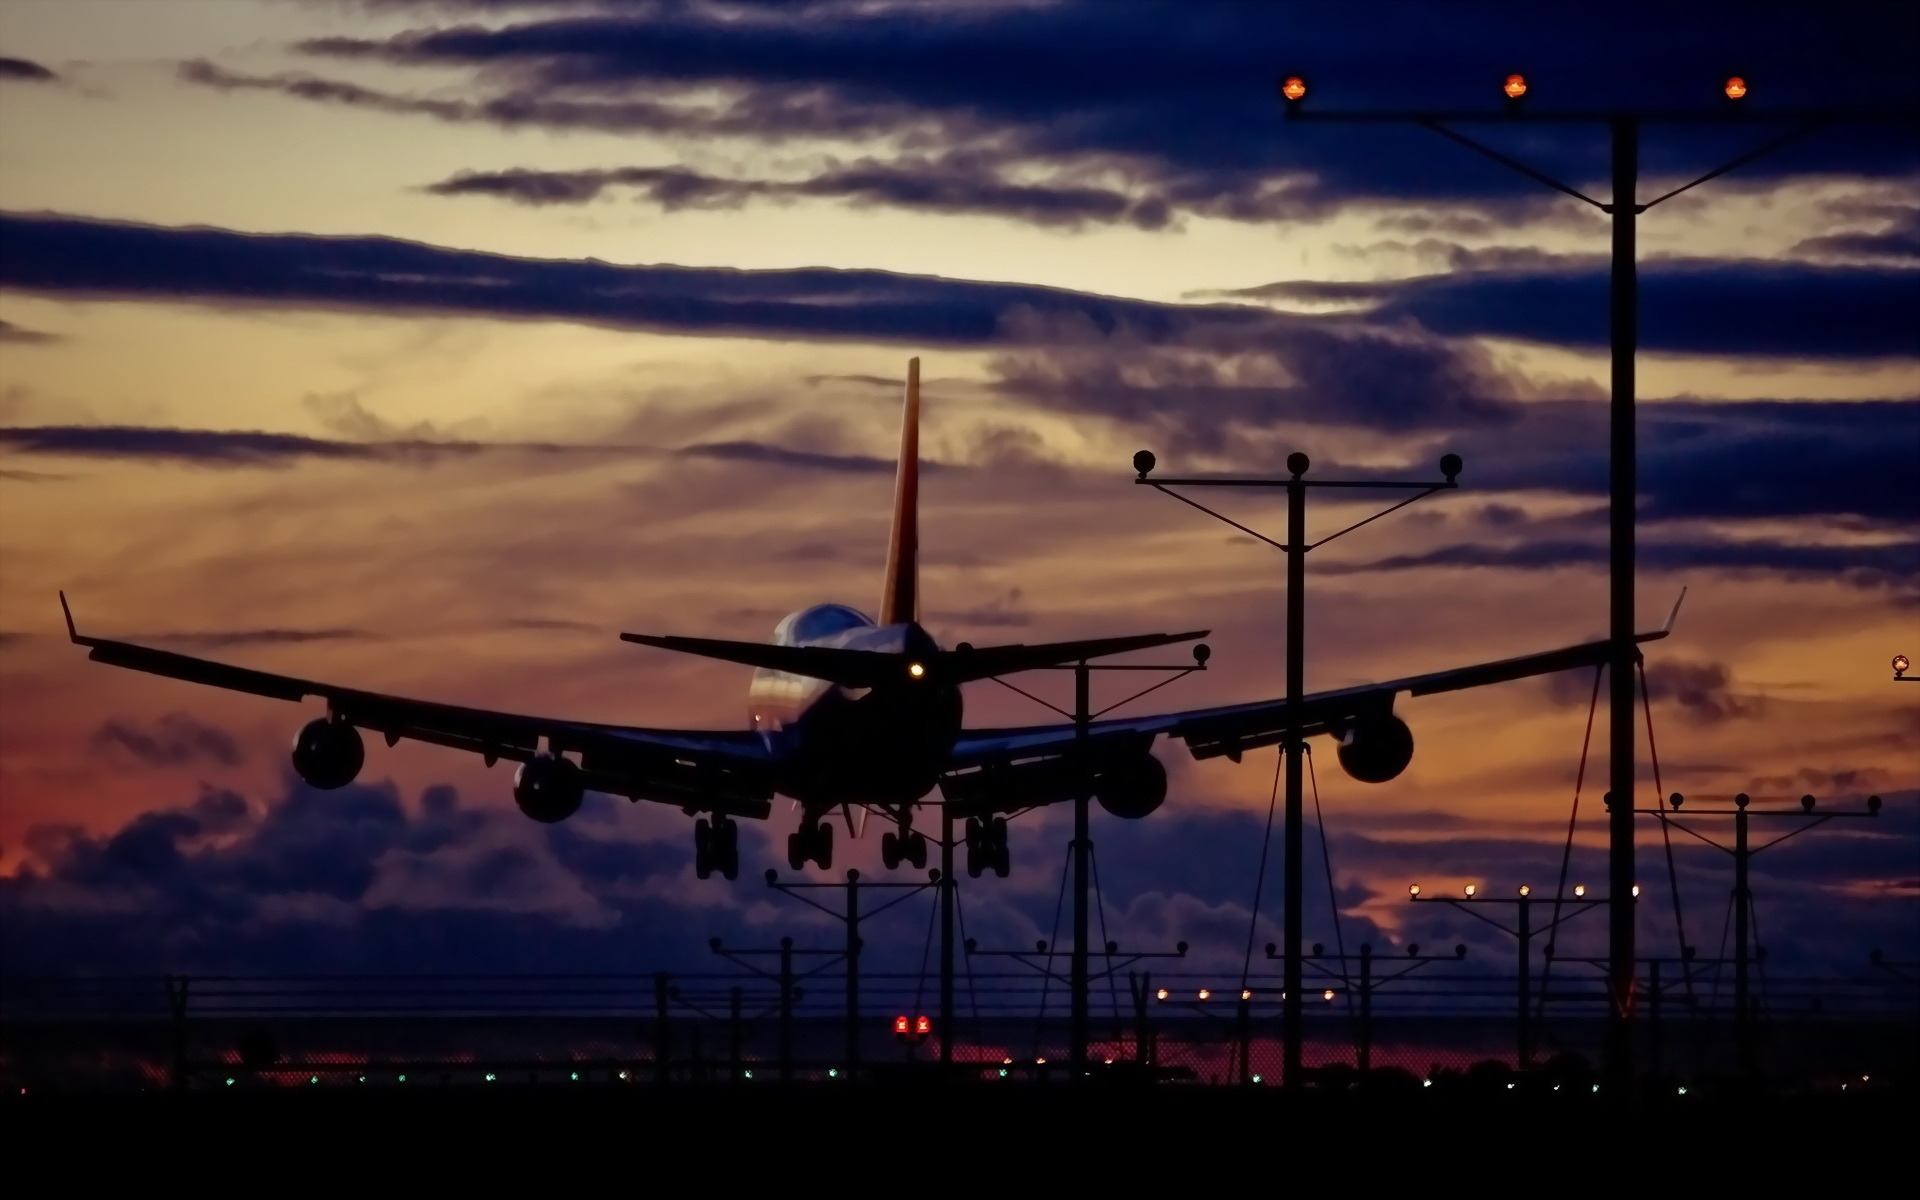 Wallpaper, sunset, night, sky, vehicle, airplane, aircraft, sunrise, evening, morning, dusk, landing, Flight, light, dawn, plane, aviation, airline, atmosphere of earth, airliner, taking off 1920x1200